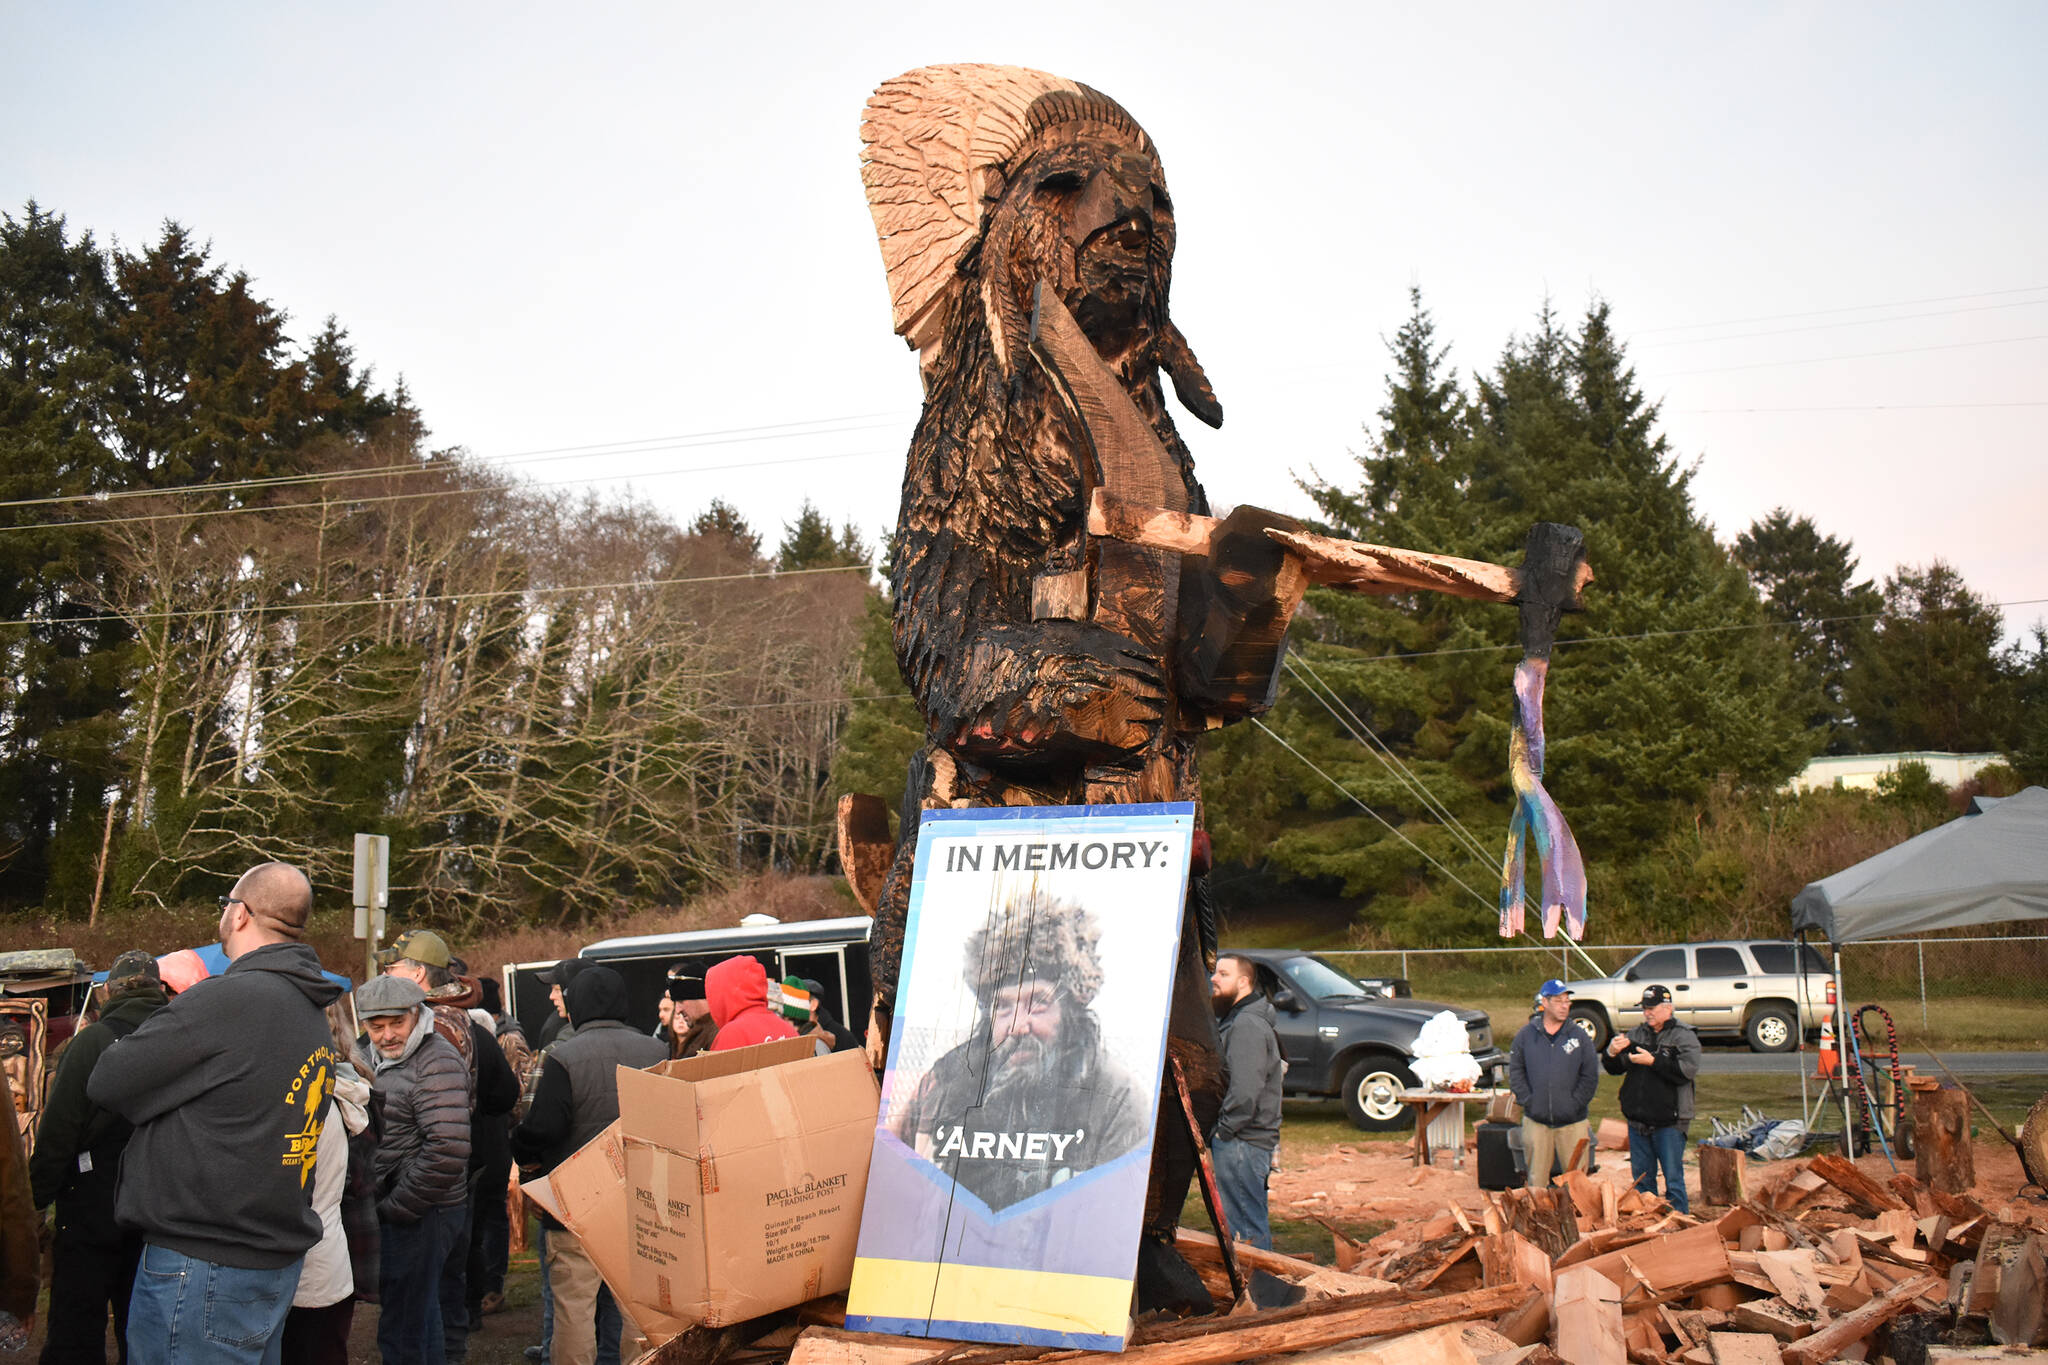 (Clayton Franke / The Daily World) A group of carvers worked together to carve the bear leading up to Saturday's festival. The bear was a tribute to several local carvers who recently passed away.